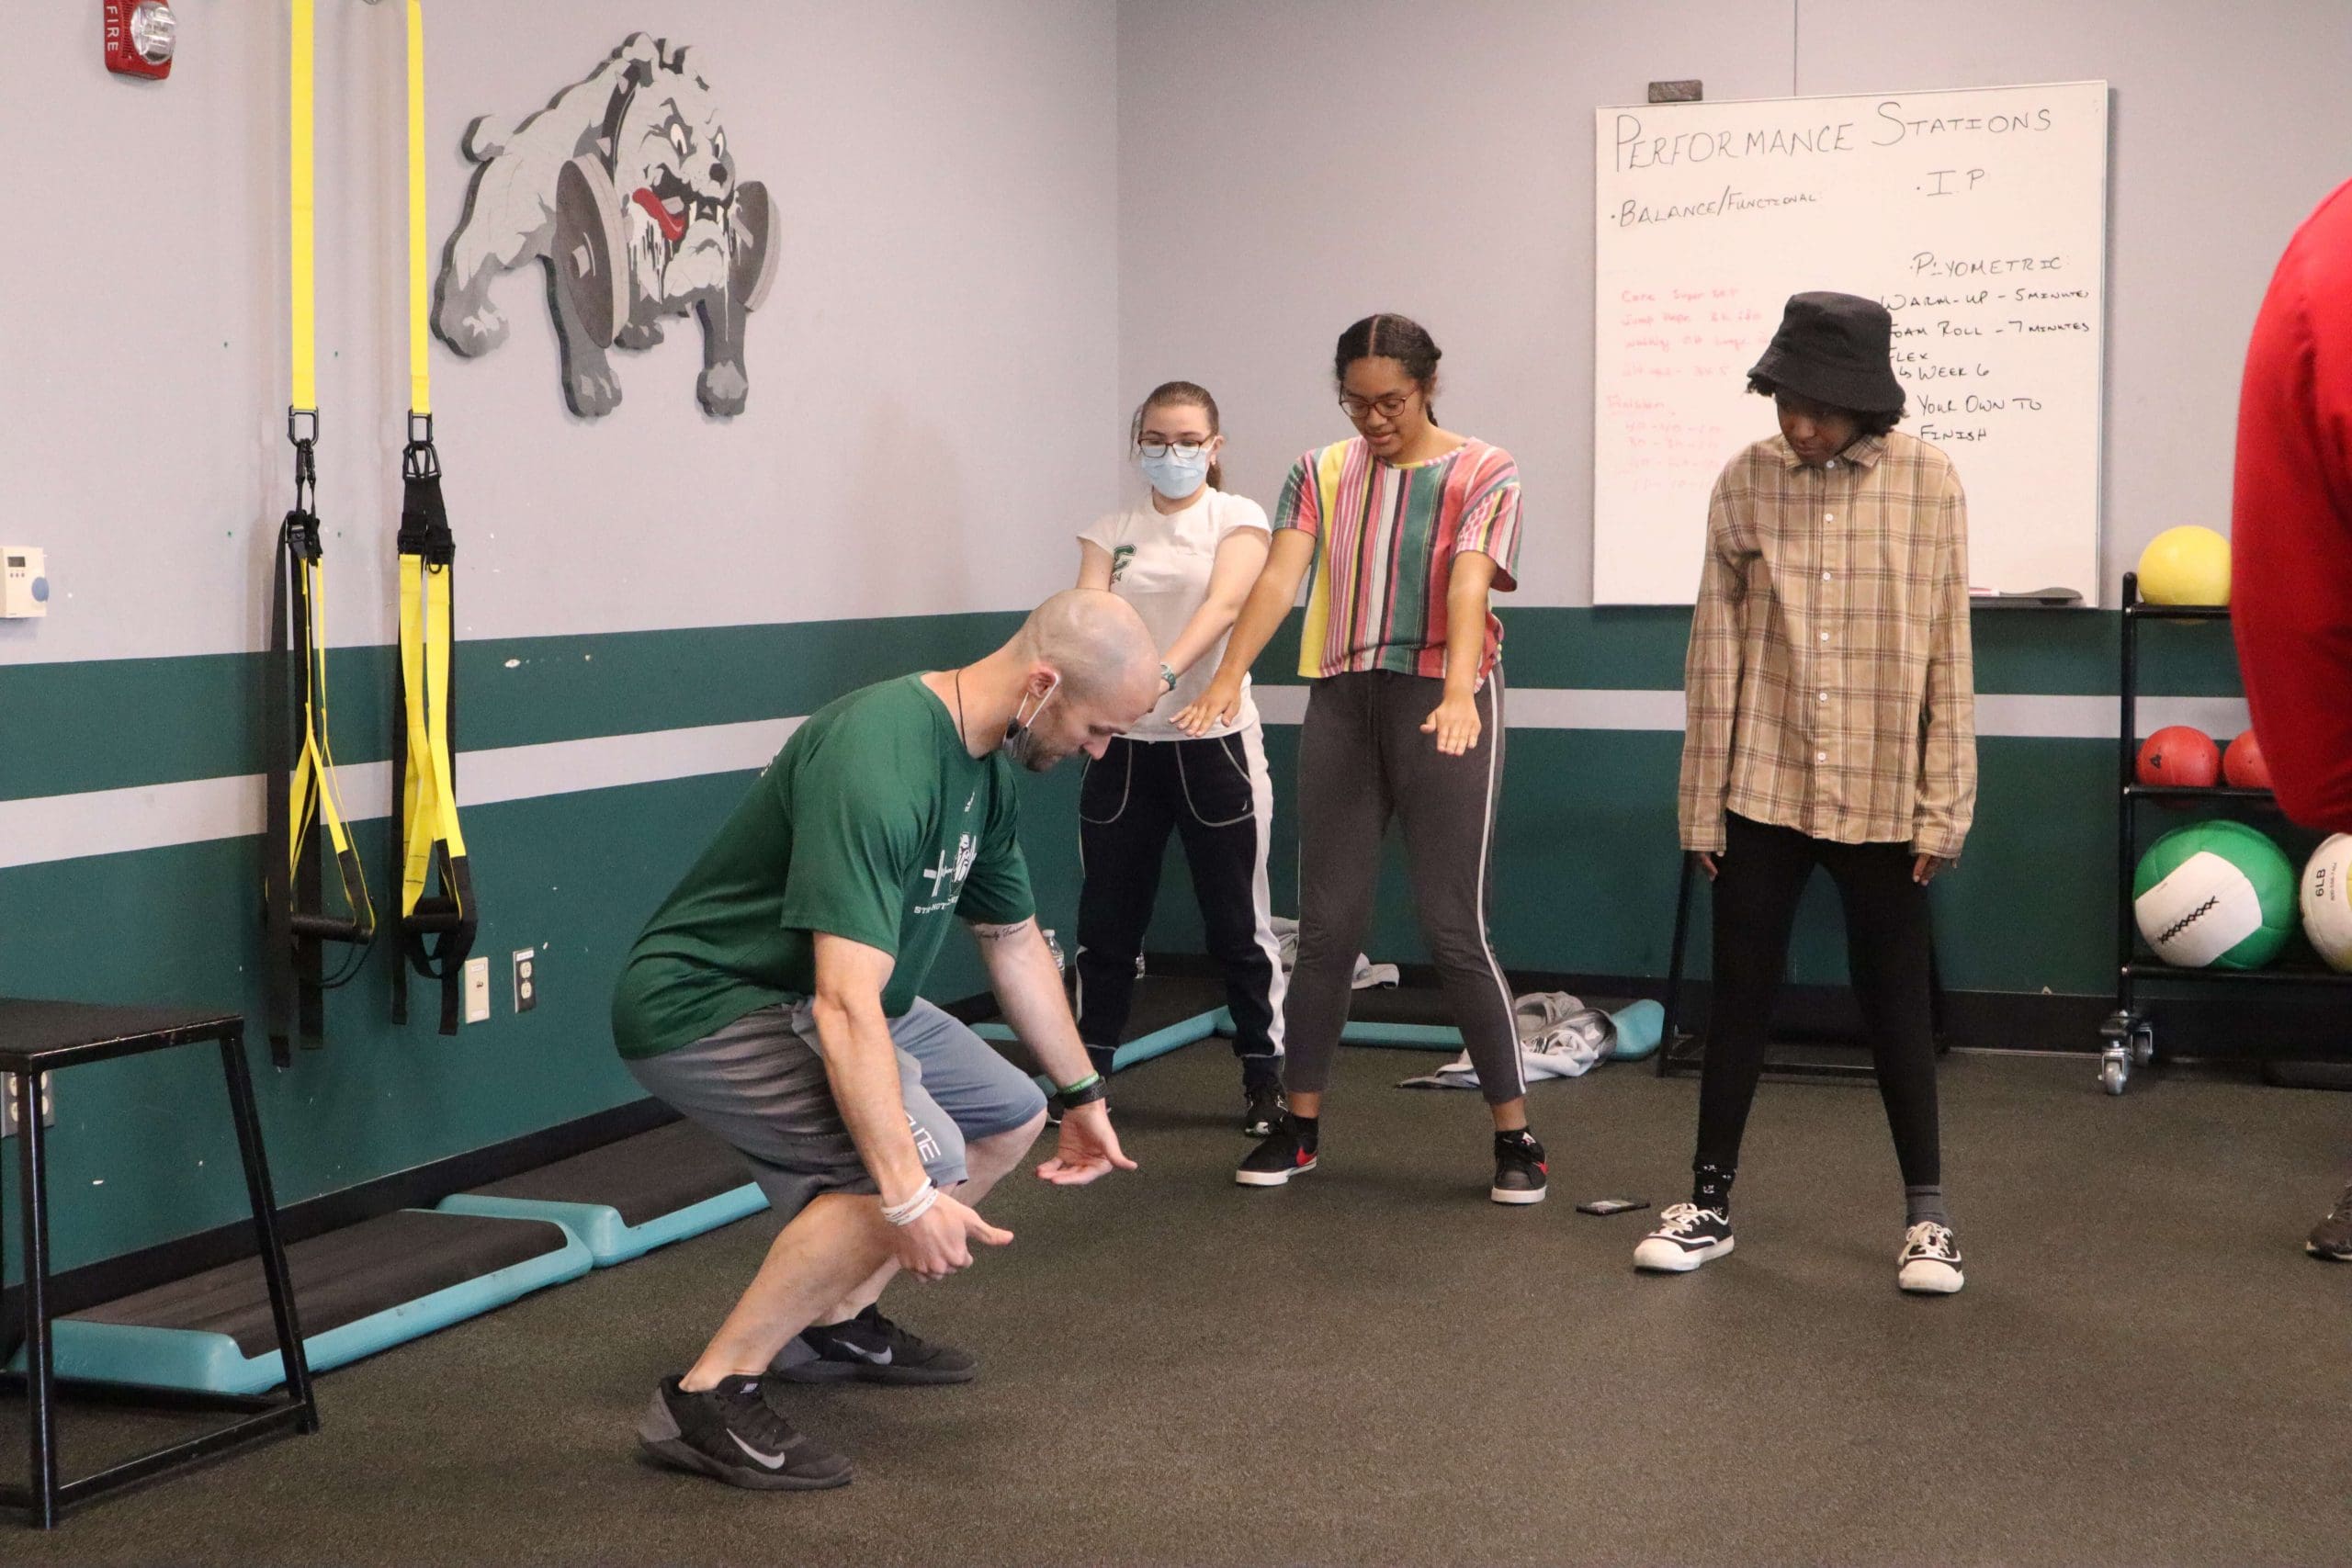 A teacher explains the points of performance of an air squat during physical education class.